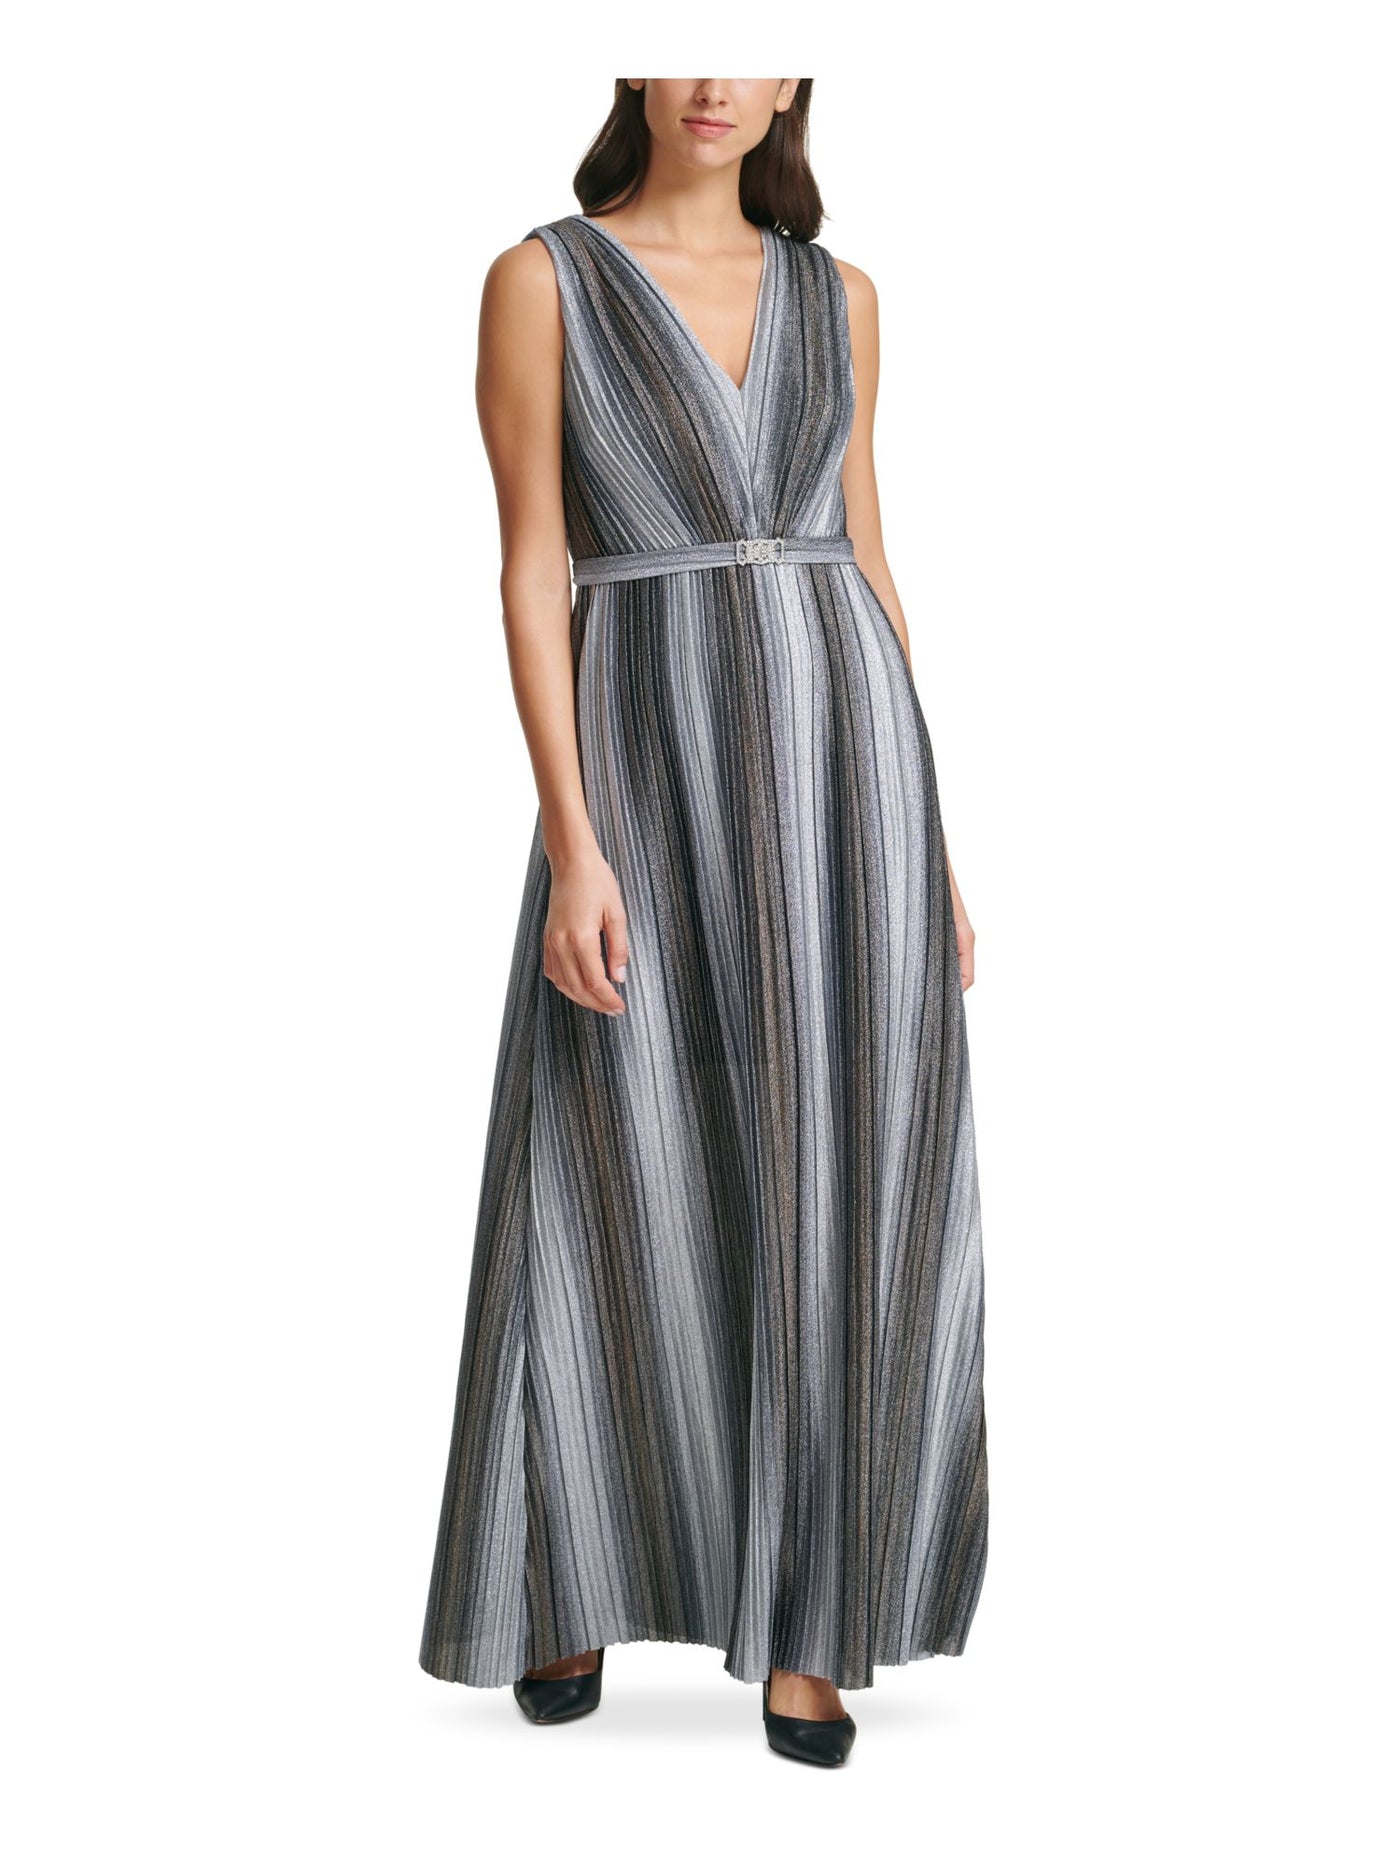 VINCE CAMUTO Womens Silver Glitter Belted Striped Sleeveless V Neck Full-Length Evening Fit + Flare Dress 8